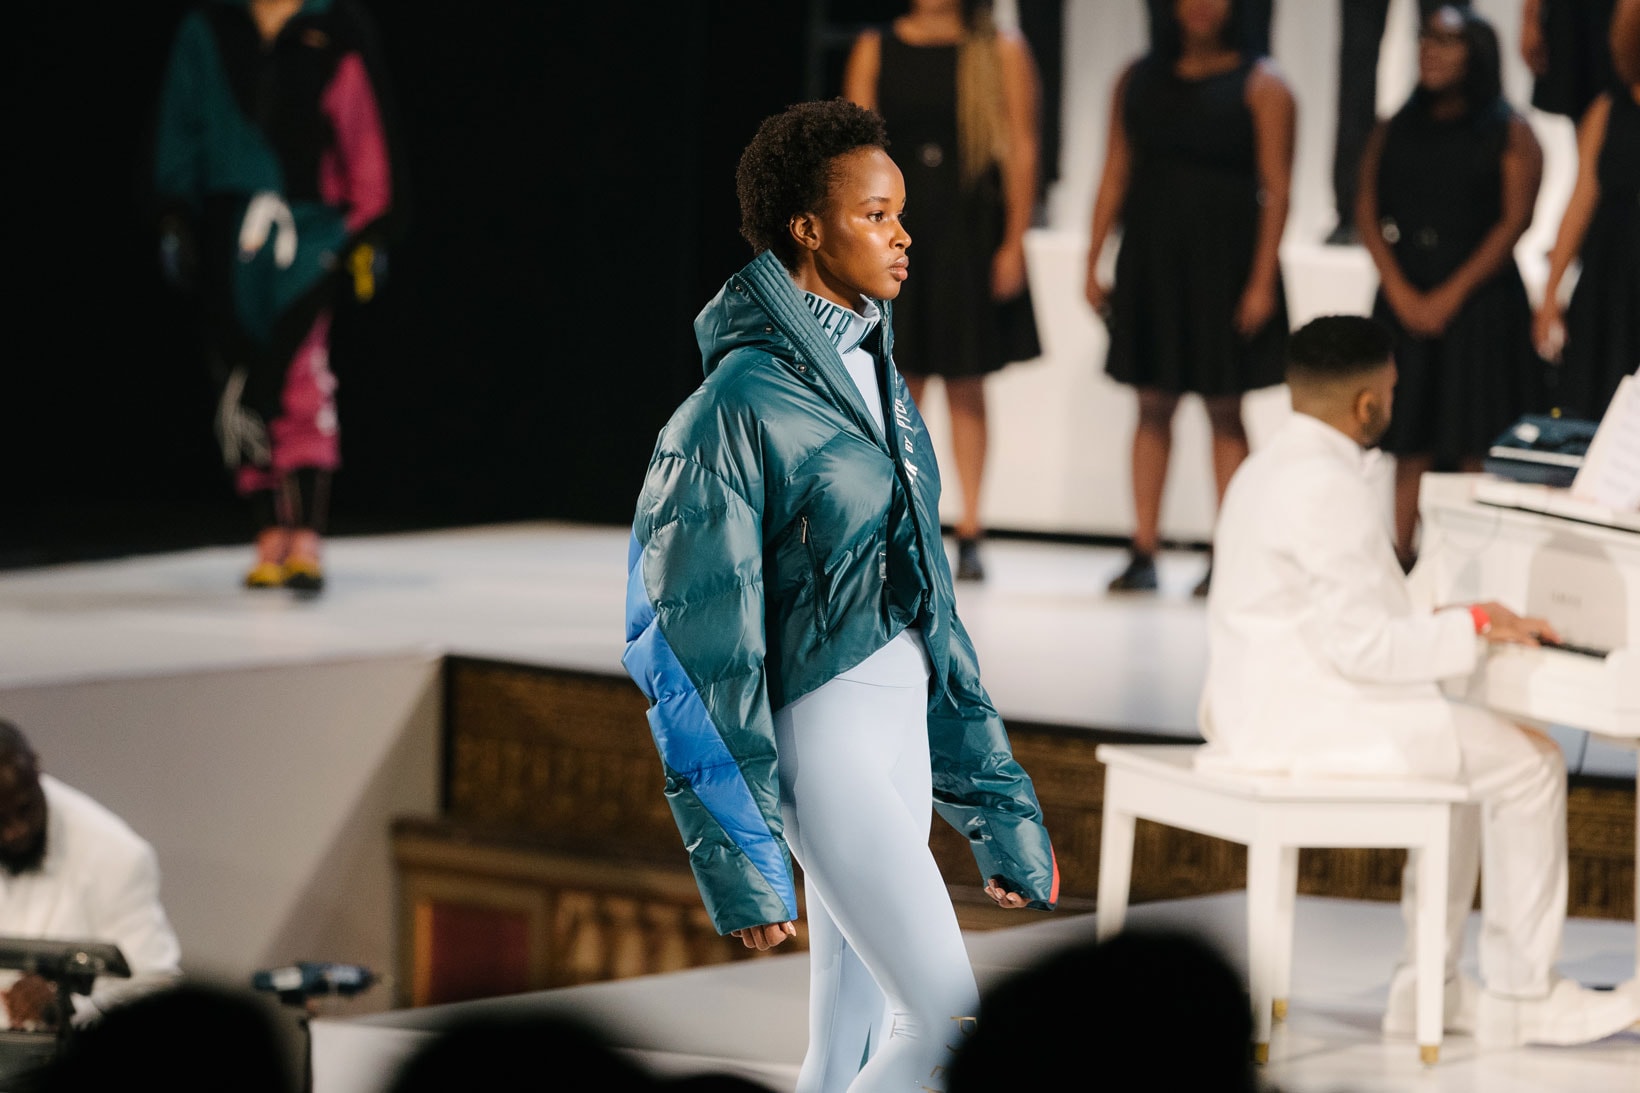 Pyer Moss Collection 3 New York Fashion Week Spring Summer 2020 Jacket Teal Pants Blue